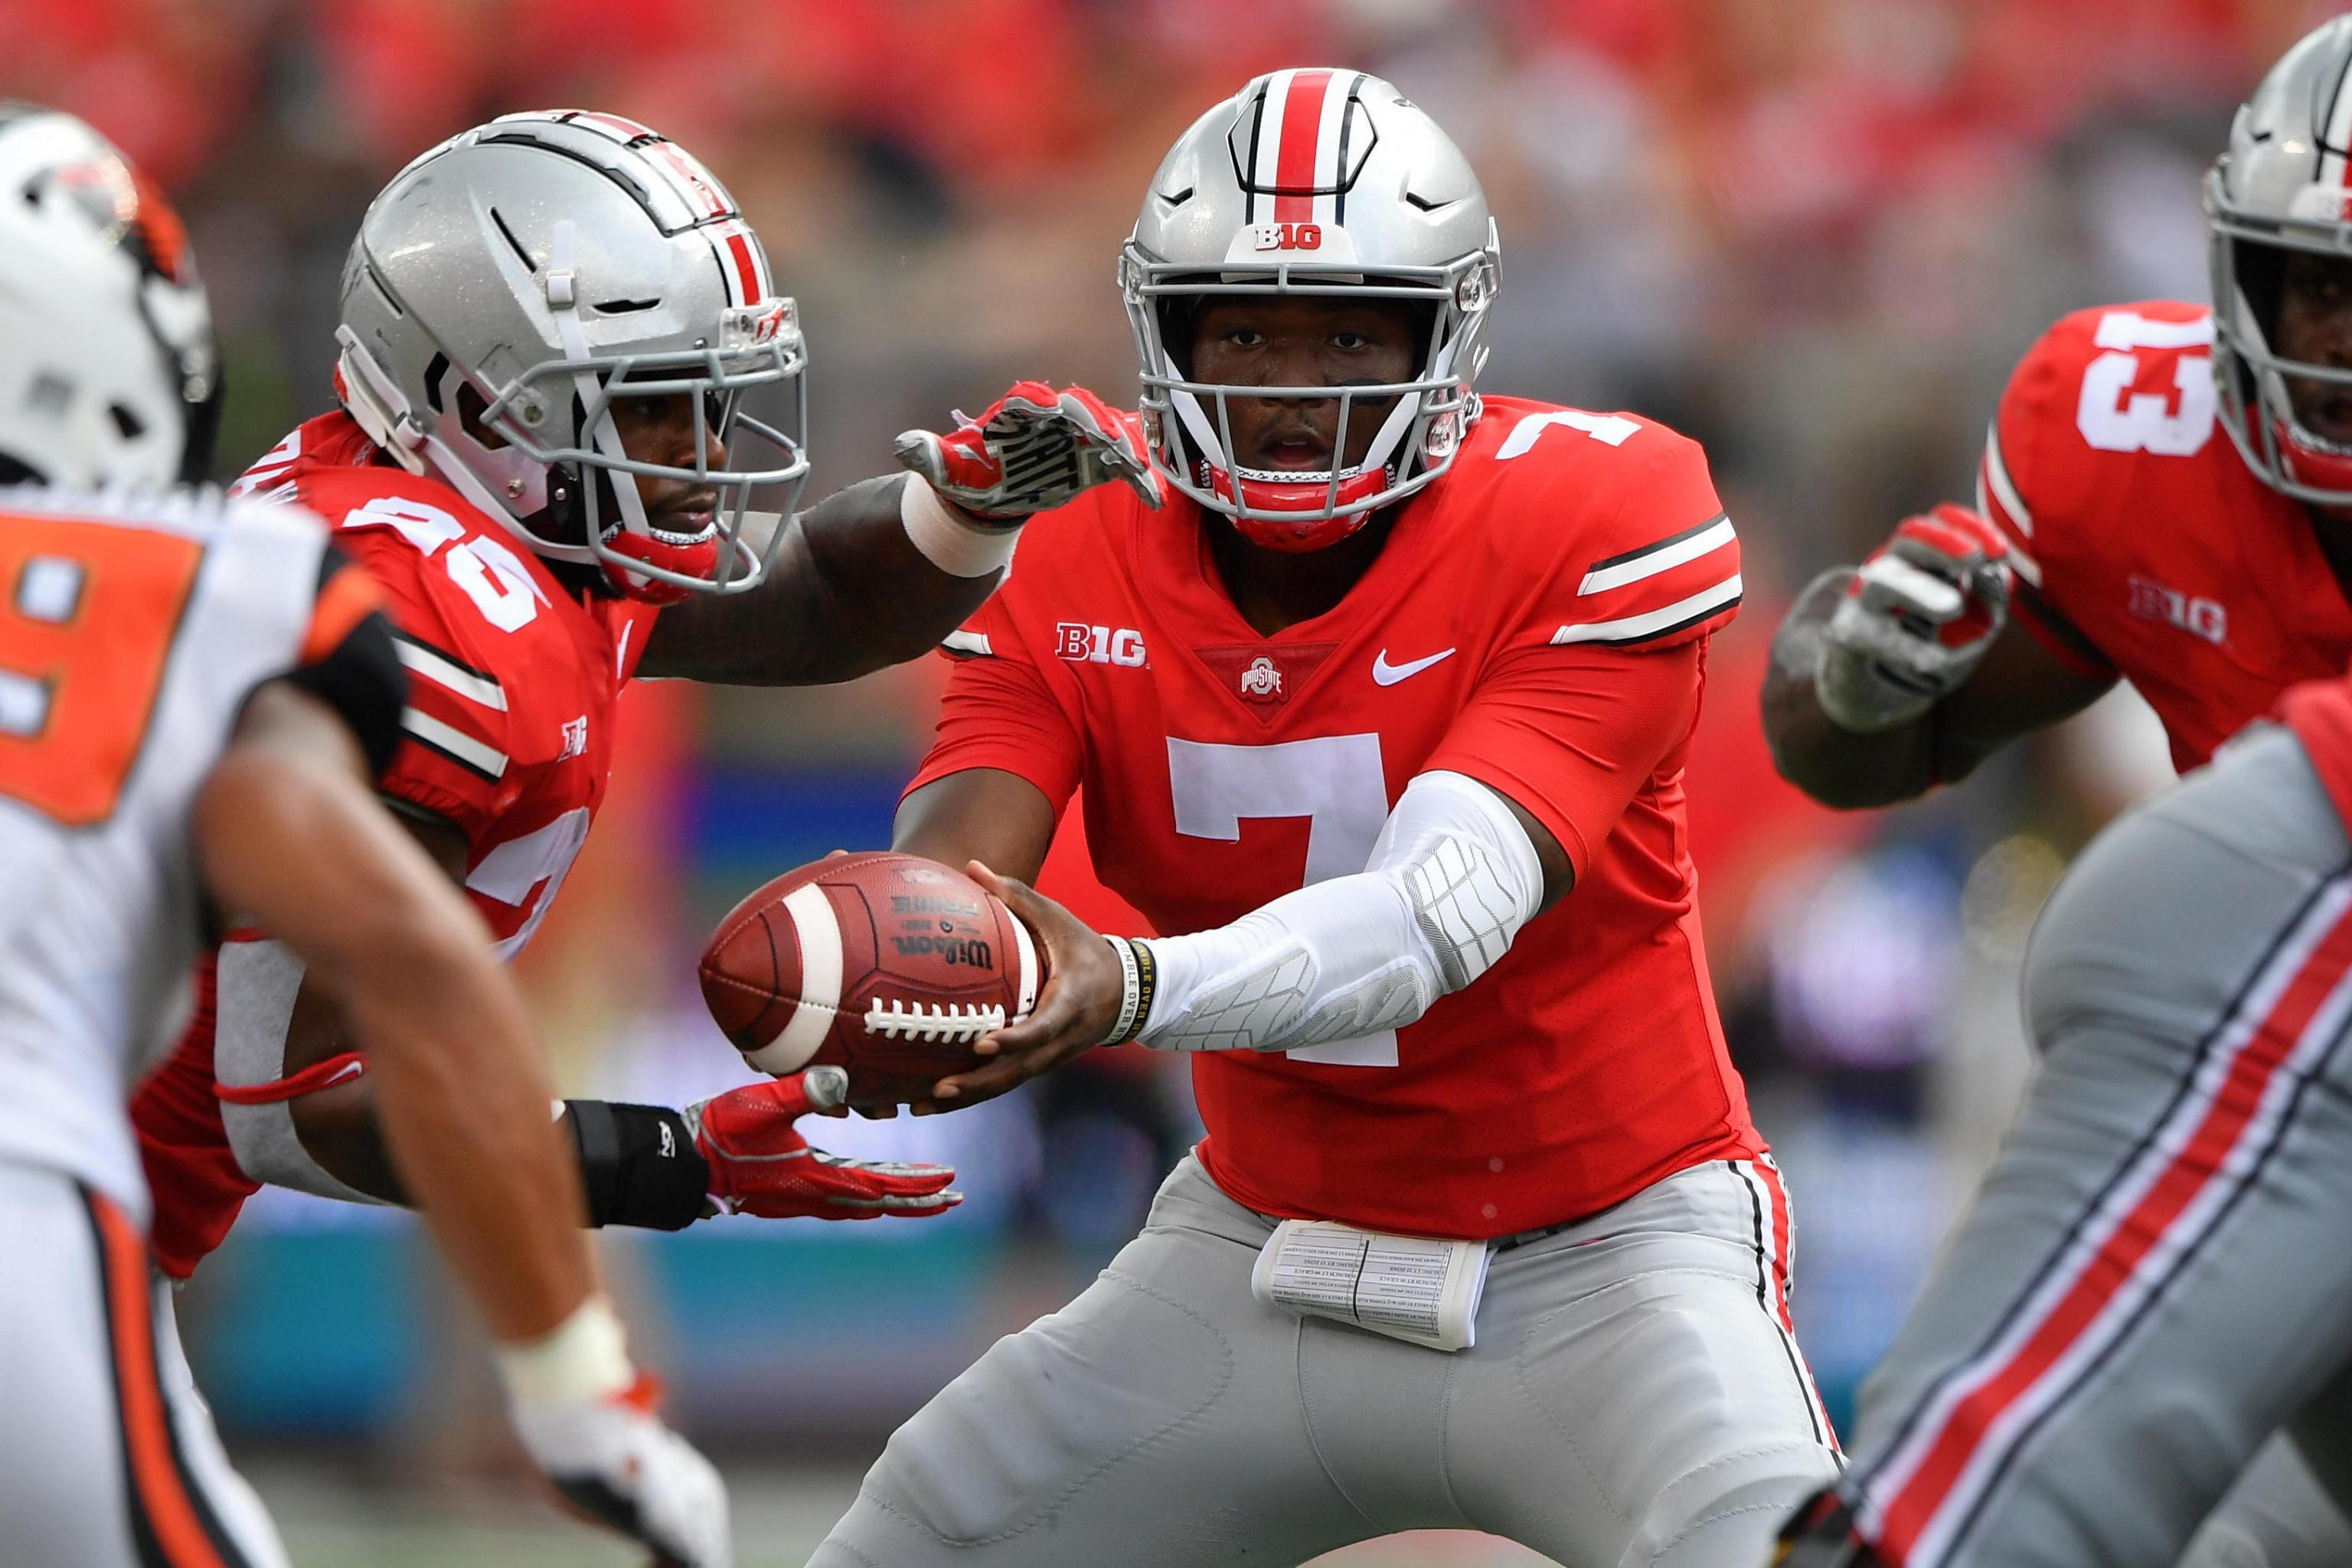 44 HQ Images Sports Betting Ohio State : Buckeyes Among Schools Pushing To Ban Collegiate Sports Betting